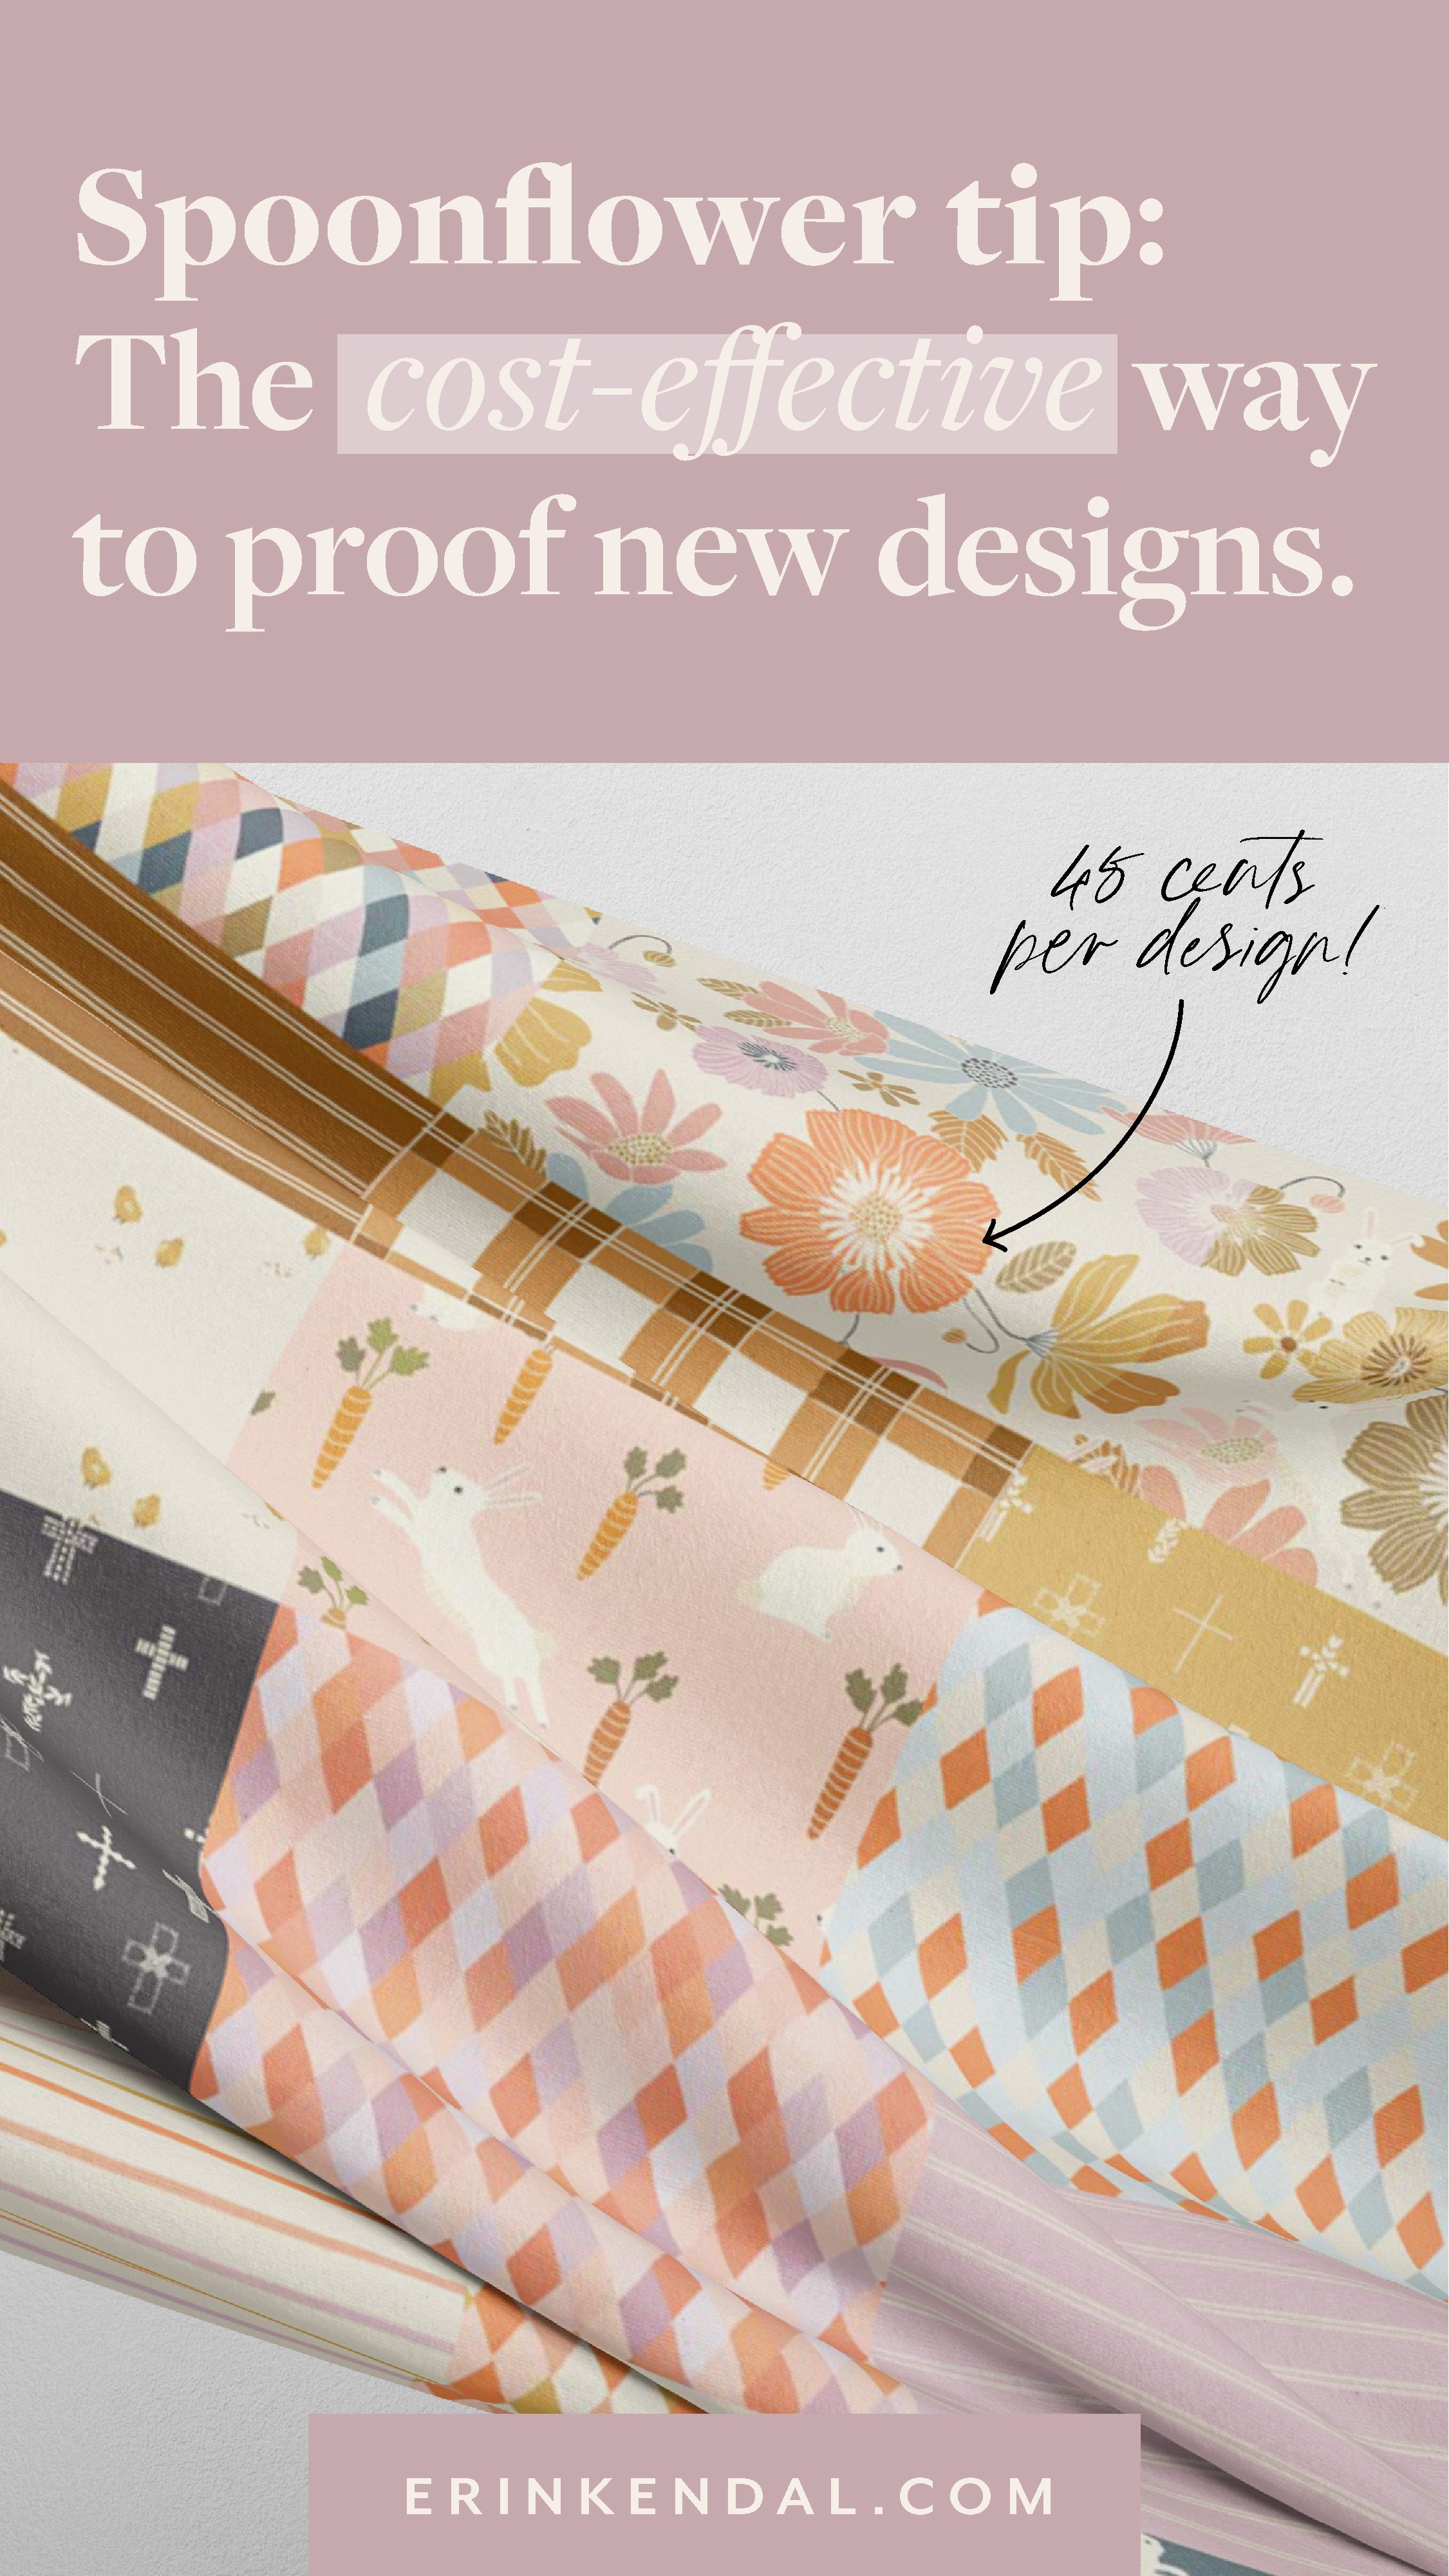 Spoonflower FAQs answered by a Spoonflower top-seller